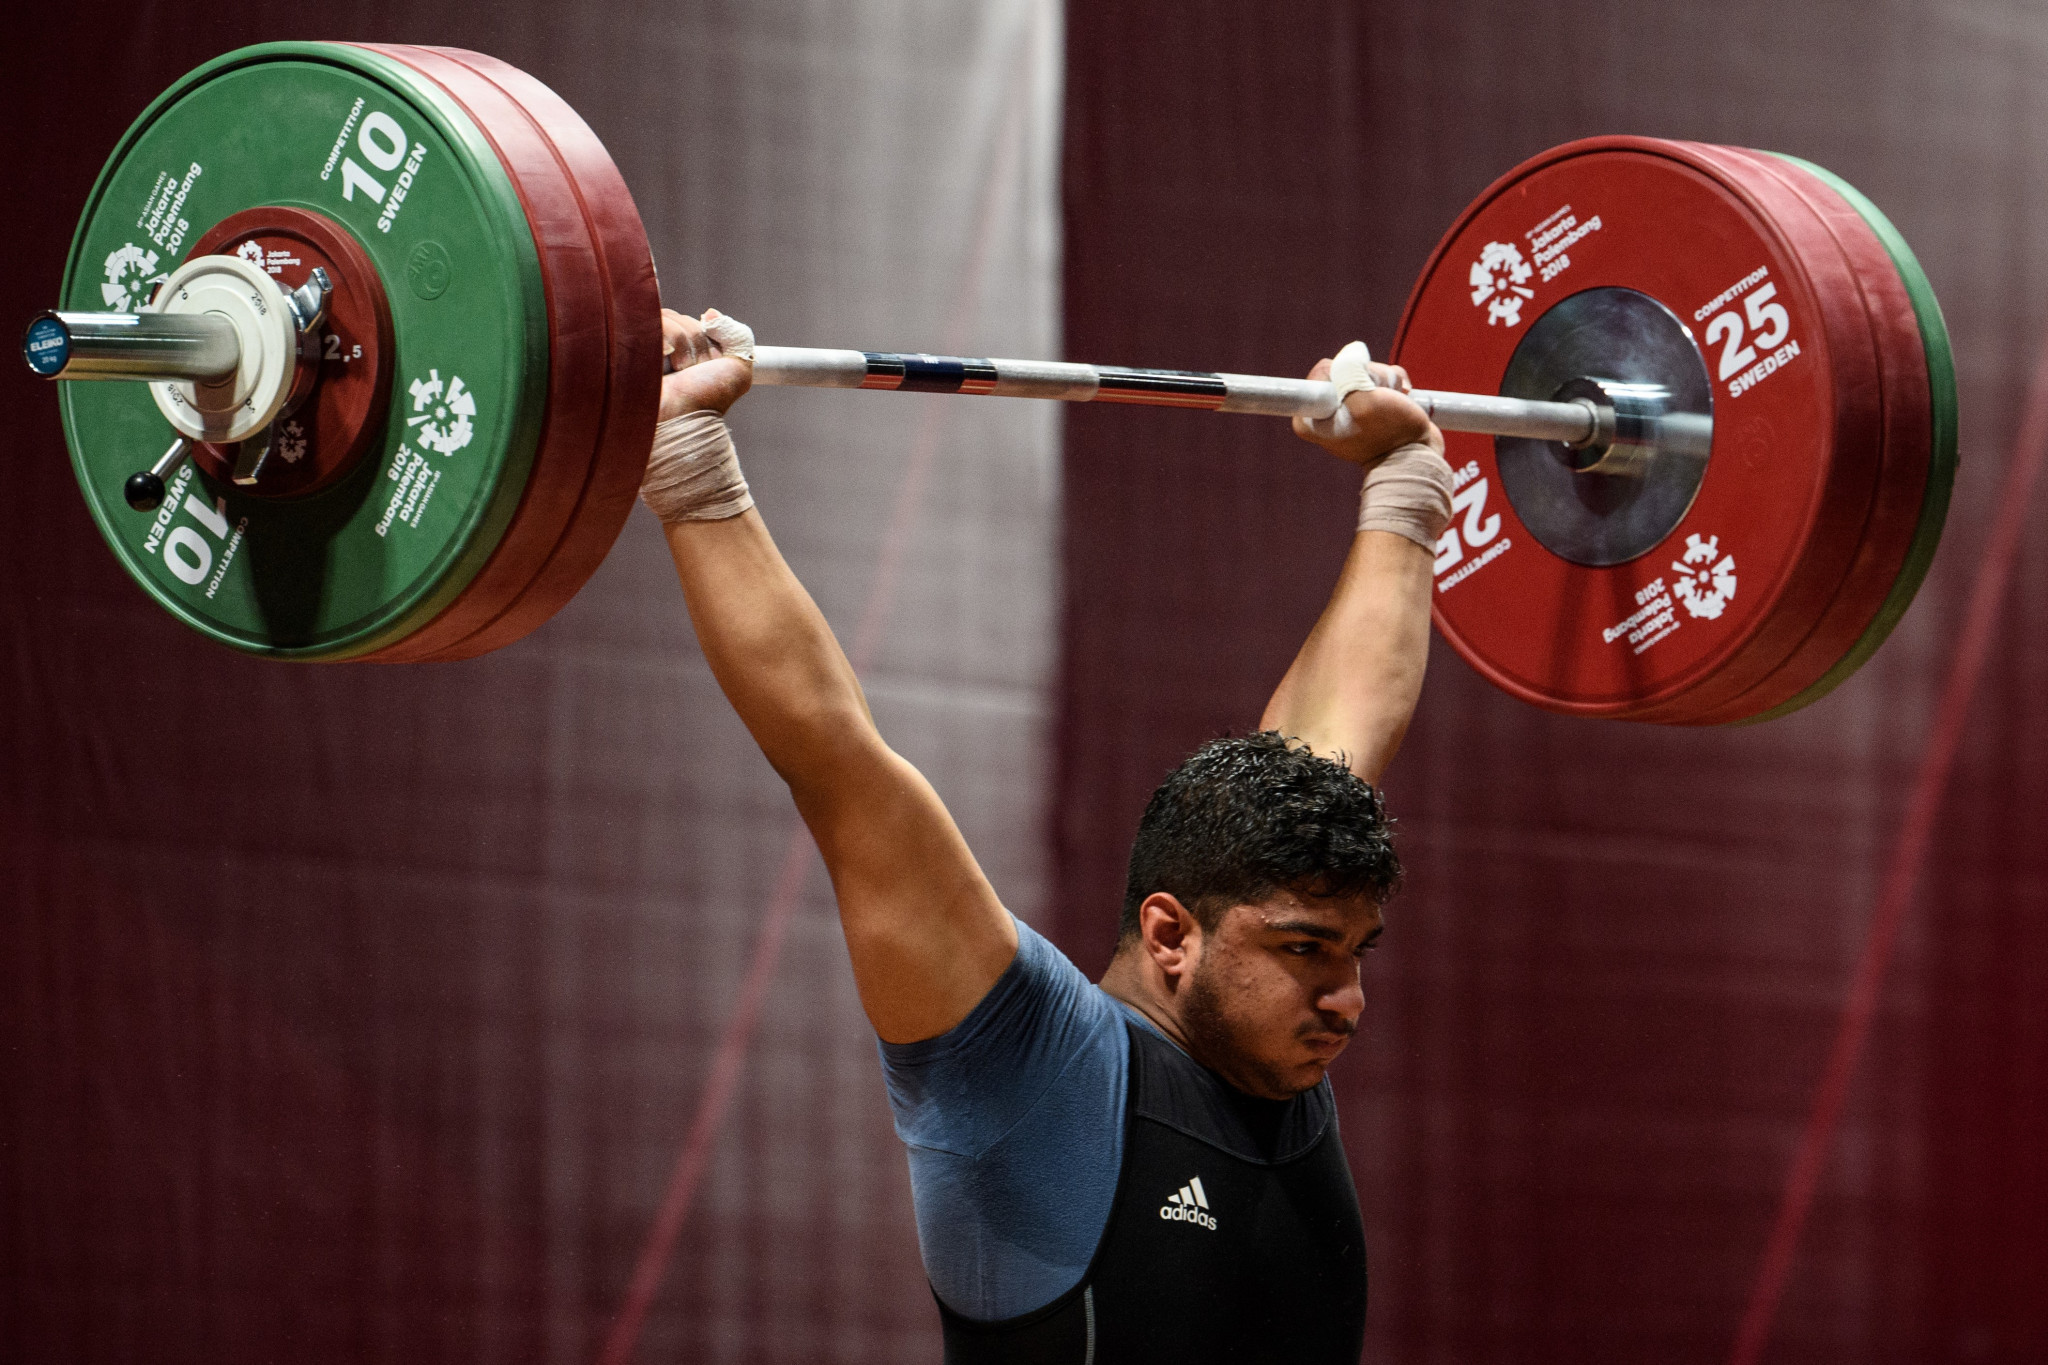 Ali Yousef Alothman won the men's overall title at 89kg ©Getty Images